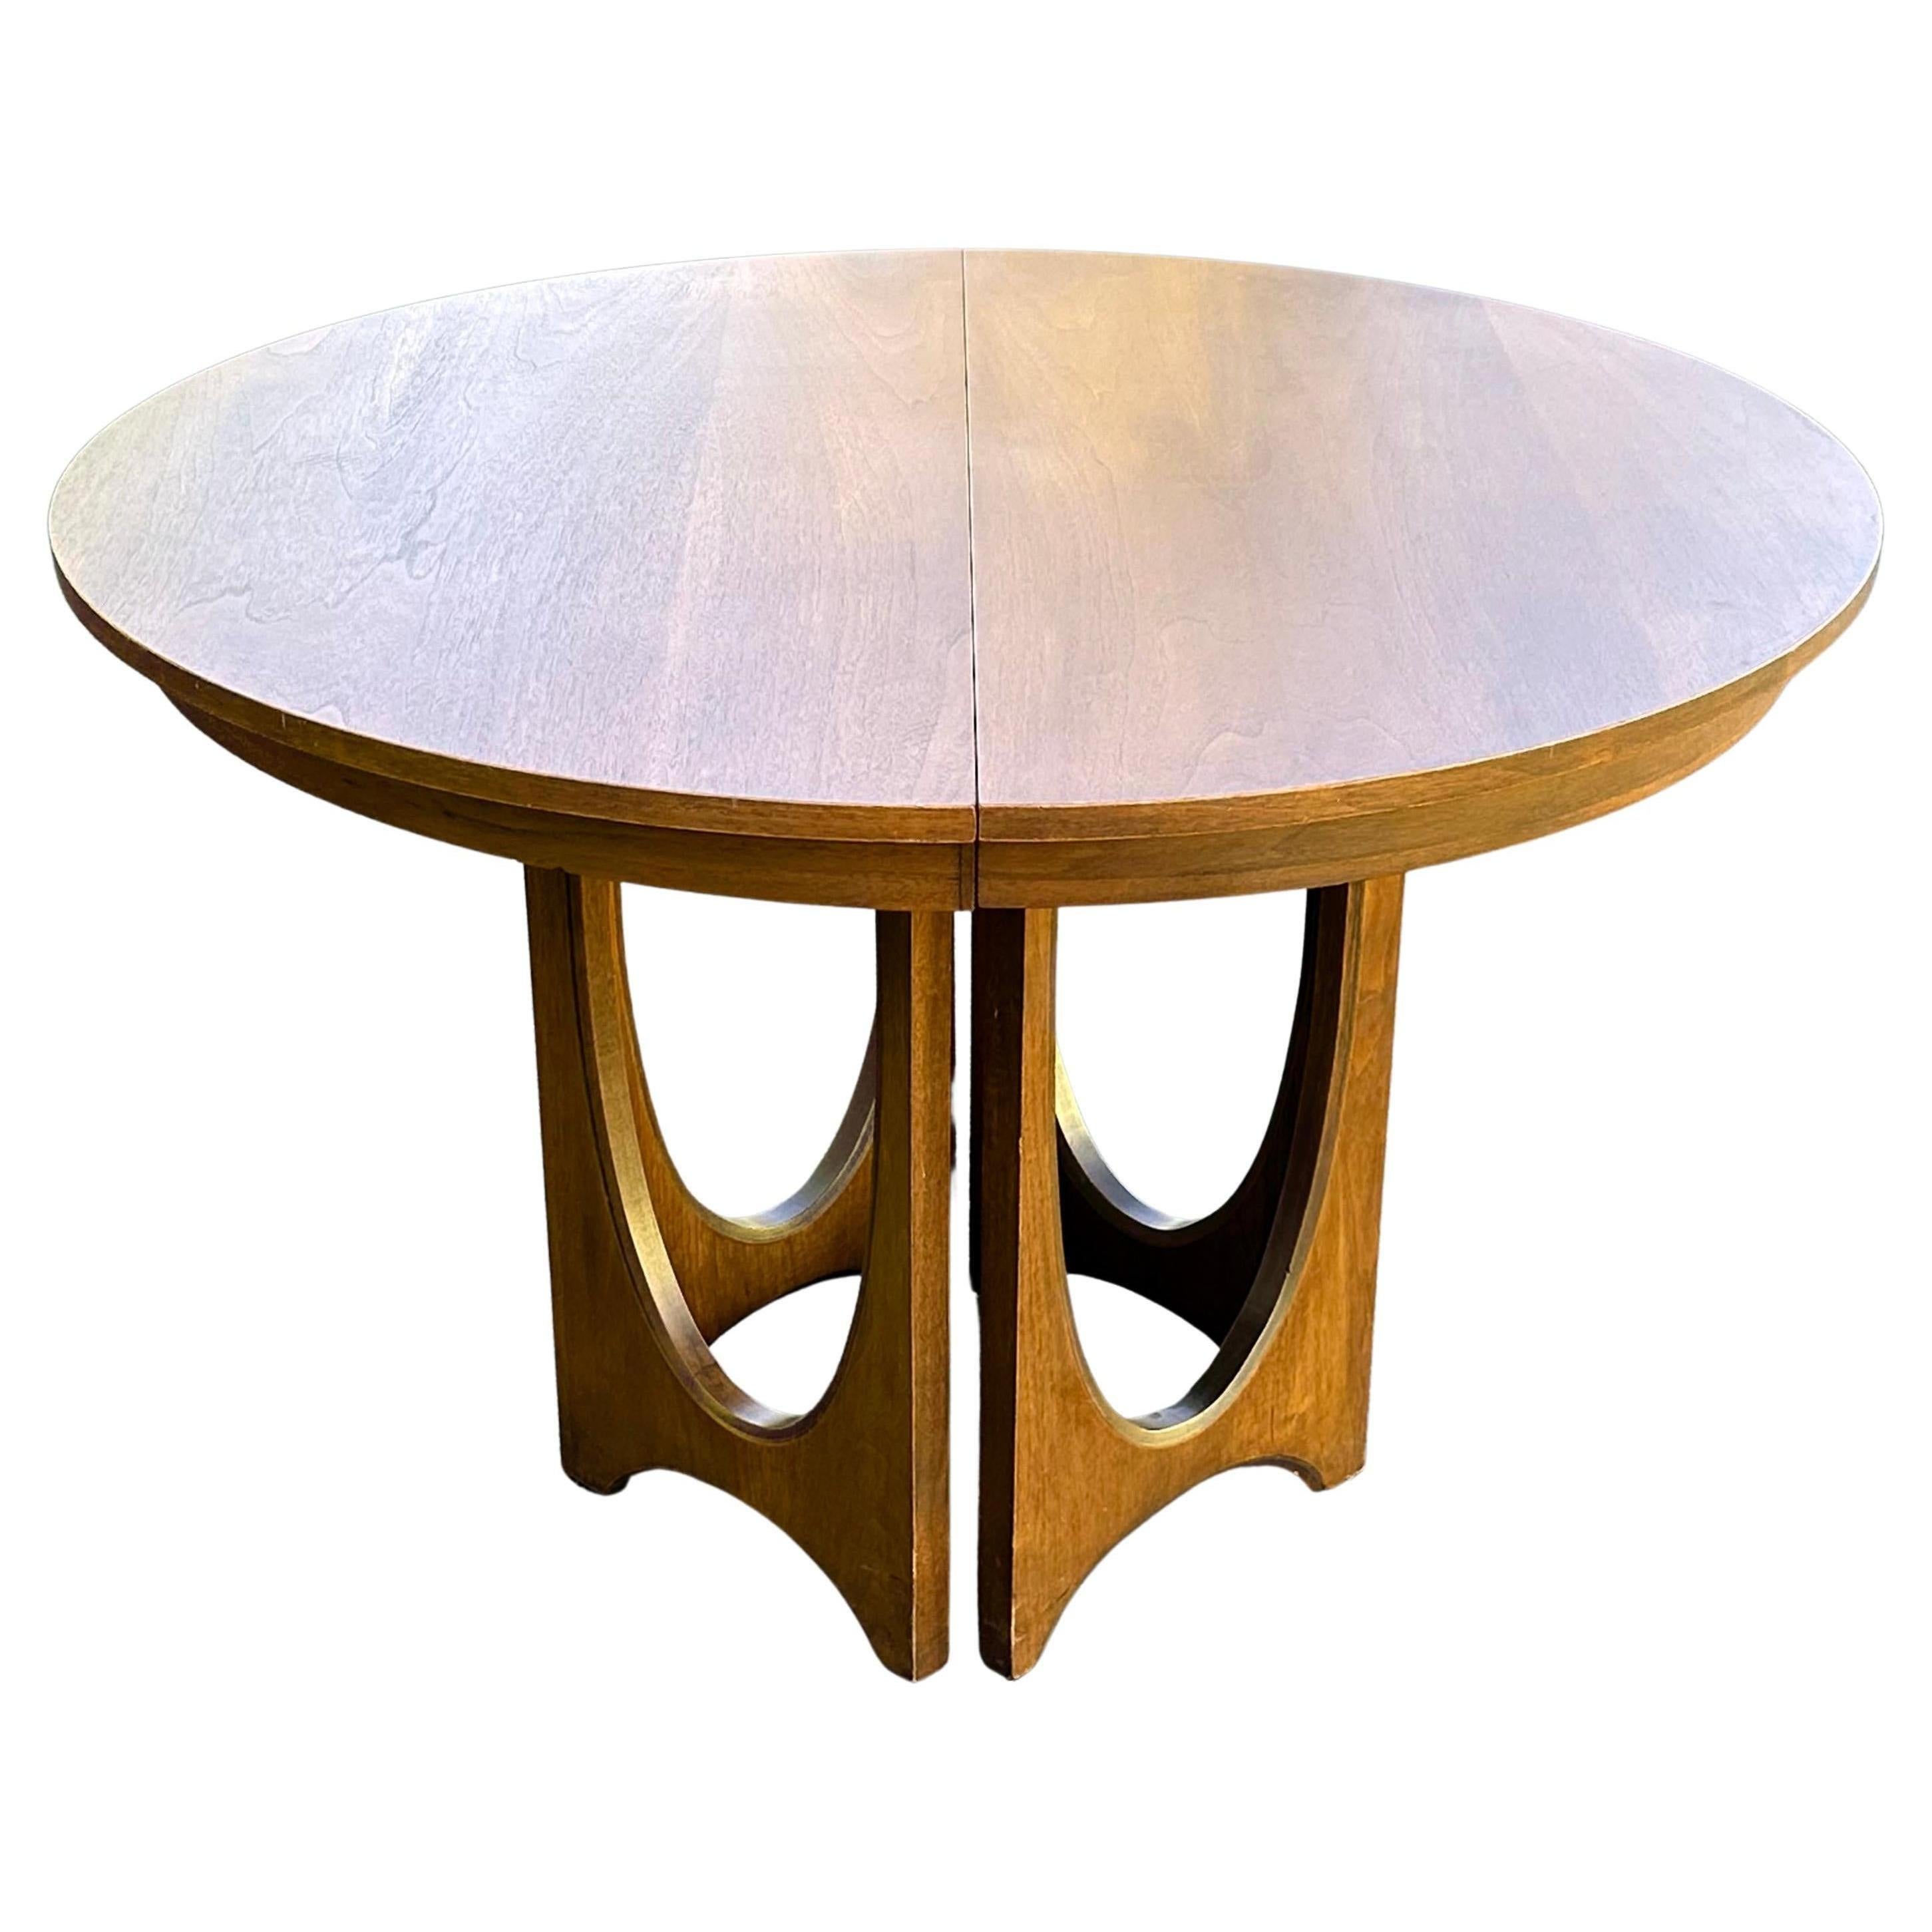 Vintage Broyhill Brasilia dining table w/ 3 leaves Mid-Century Modern

Mid-Century Modern Brasilia extending dining table by Broyhill. Originally designed in the 1960s, based on the designs of architect Oscar Niemeyer coming from the capital city